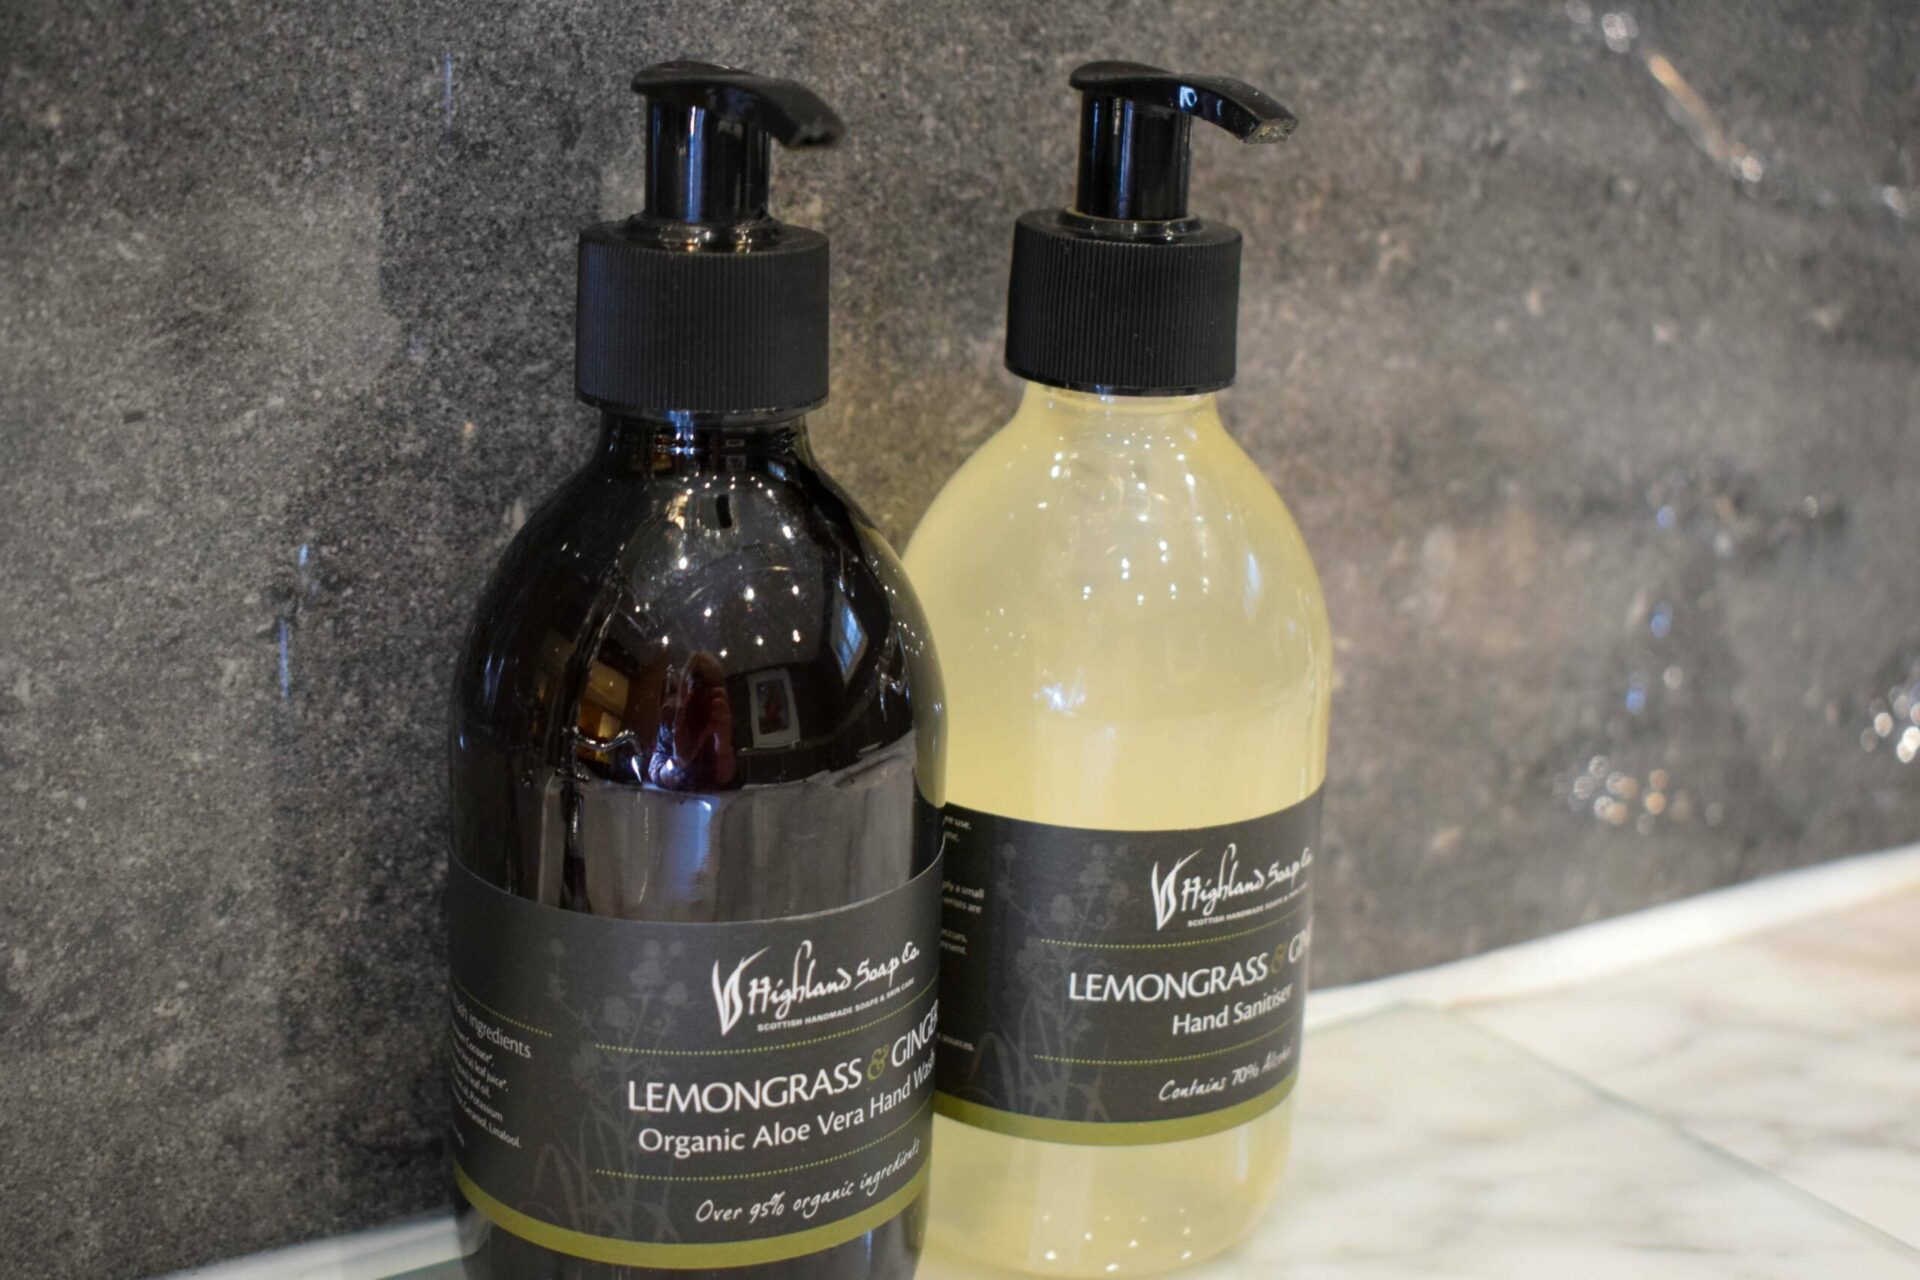 Our Hideaways all feature luxury toiletries from local business Highland Soap Company